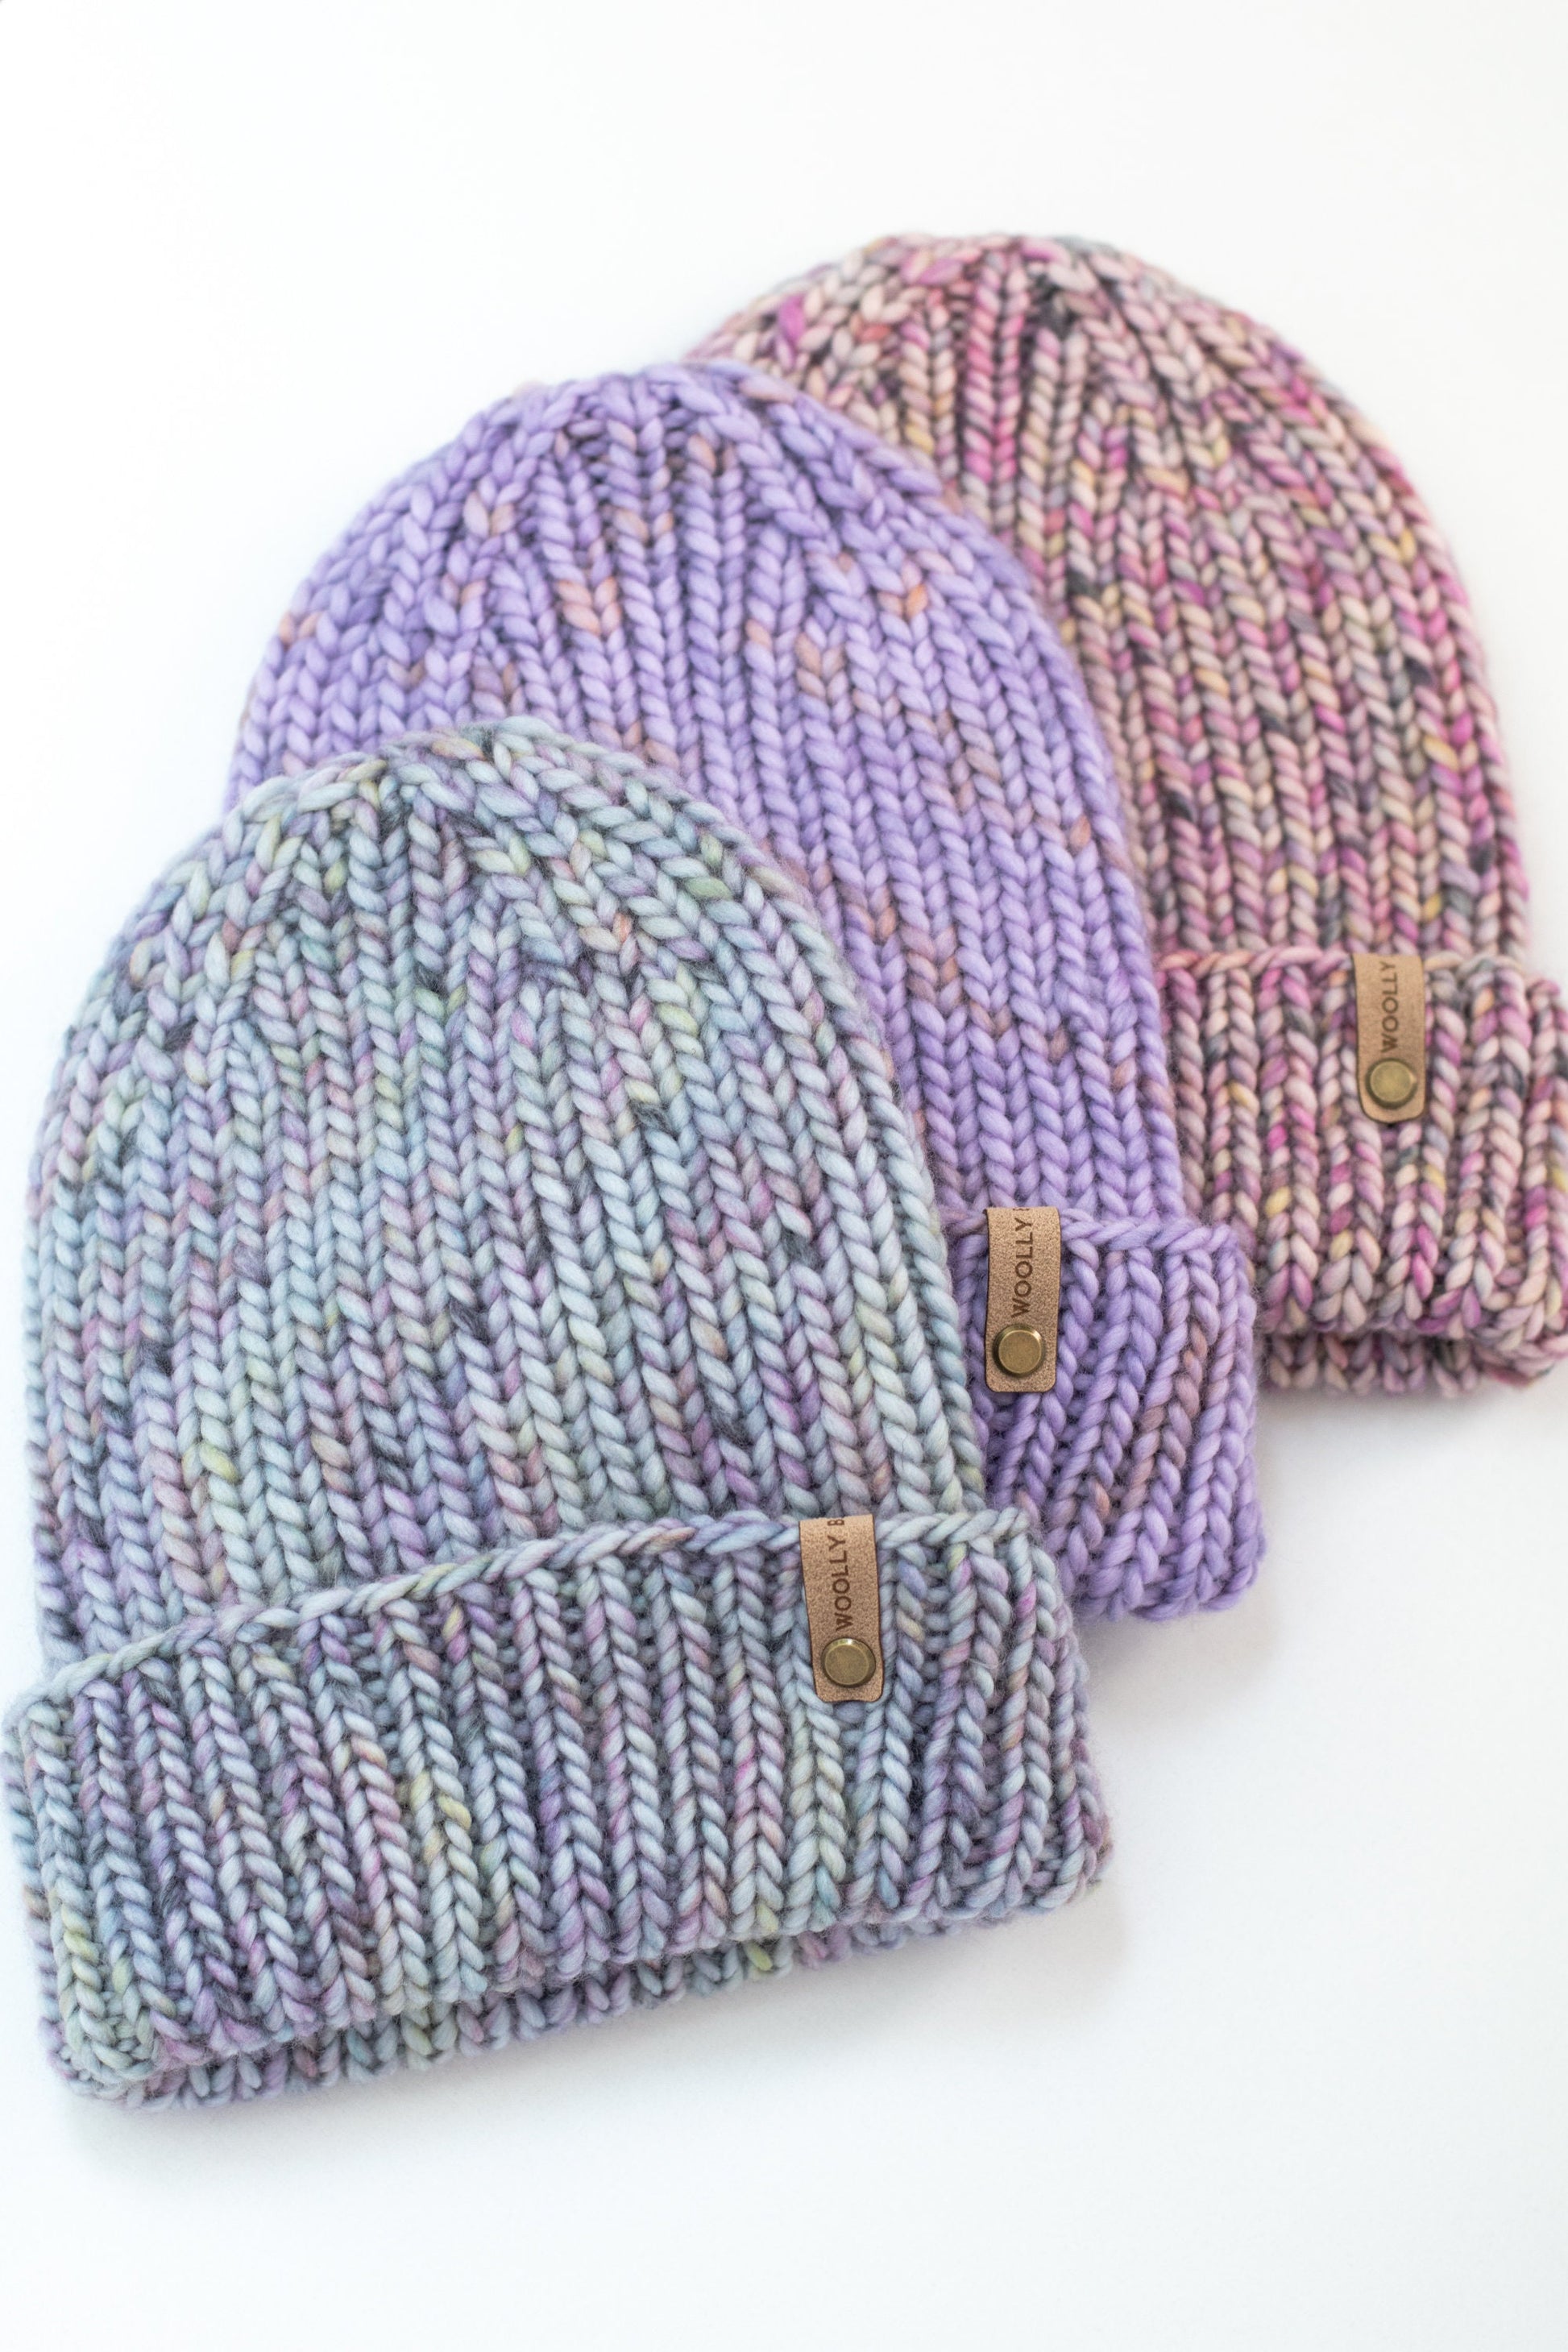 Lavender Speckle Merino Wool Hand Knit Ribbed Beanie